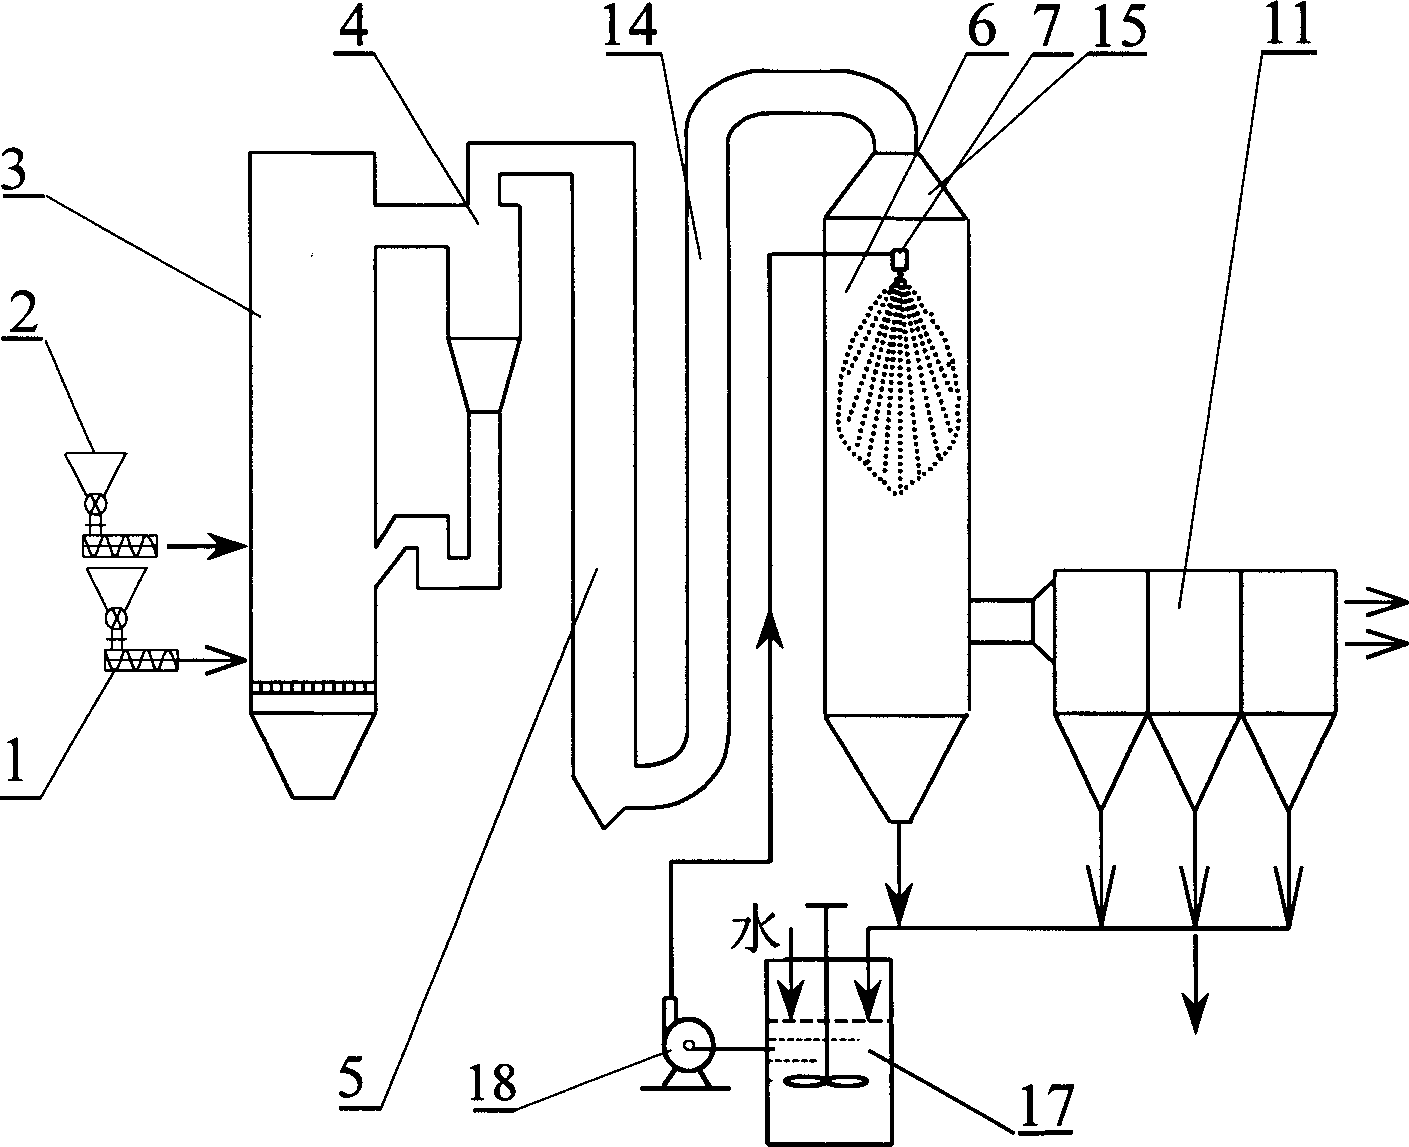 Compound desulfurizing process of circulating fluidized bed boiler